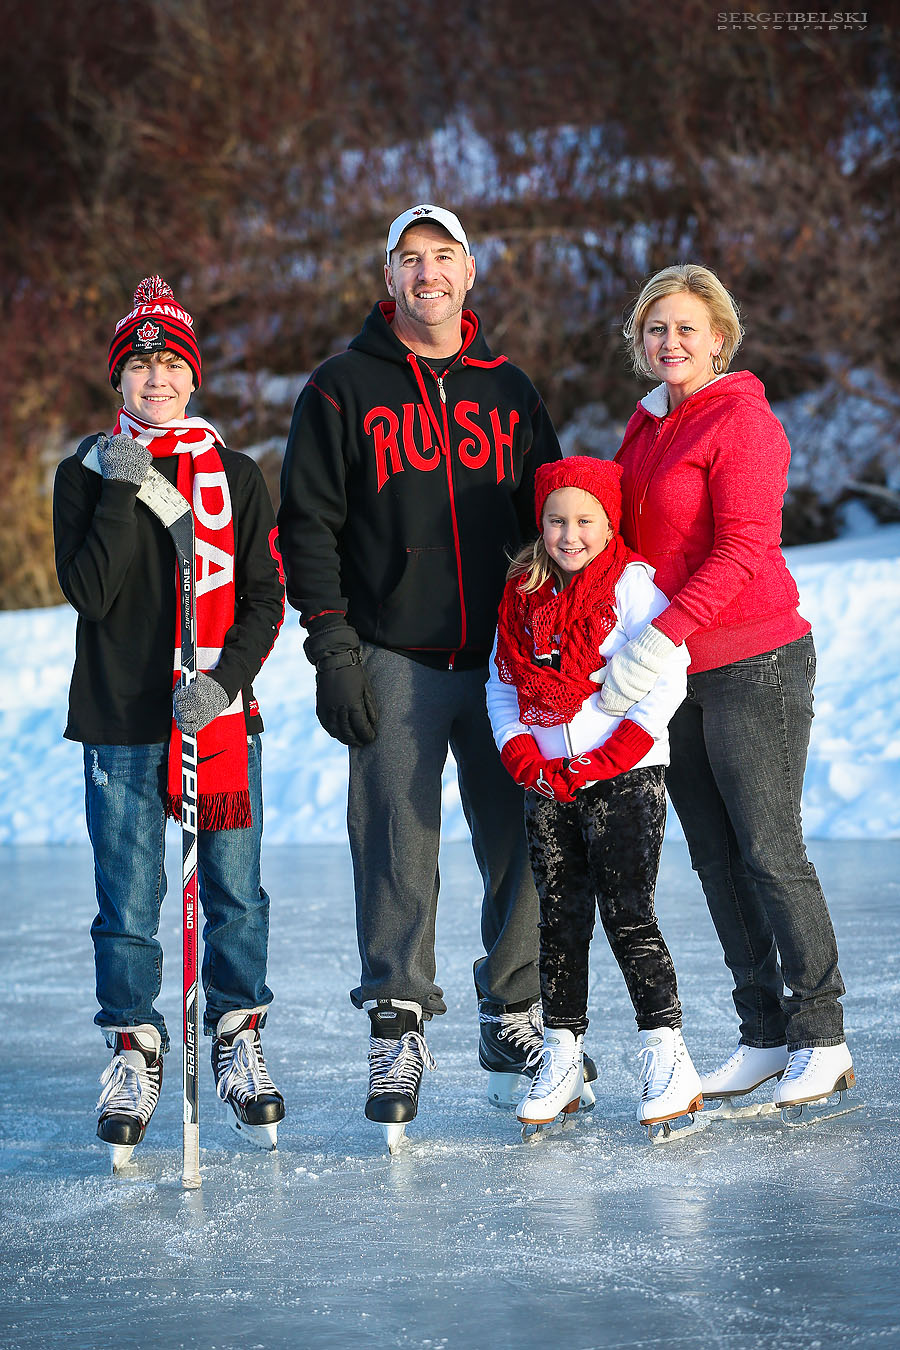 city of airdrie family photographer sergei belski photo